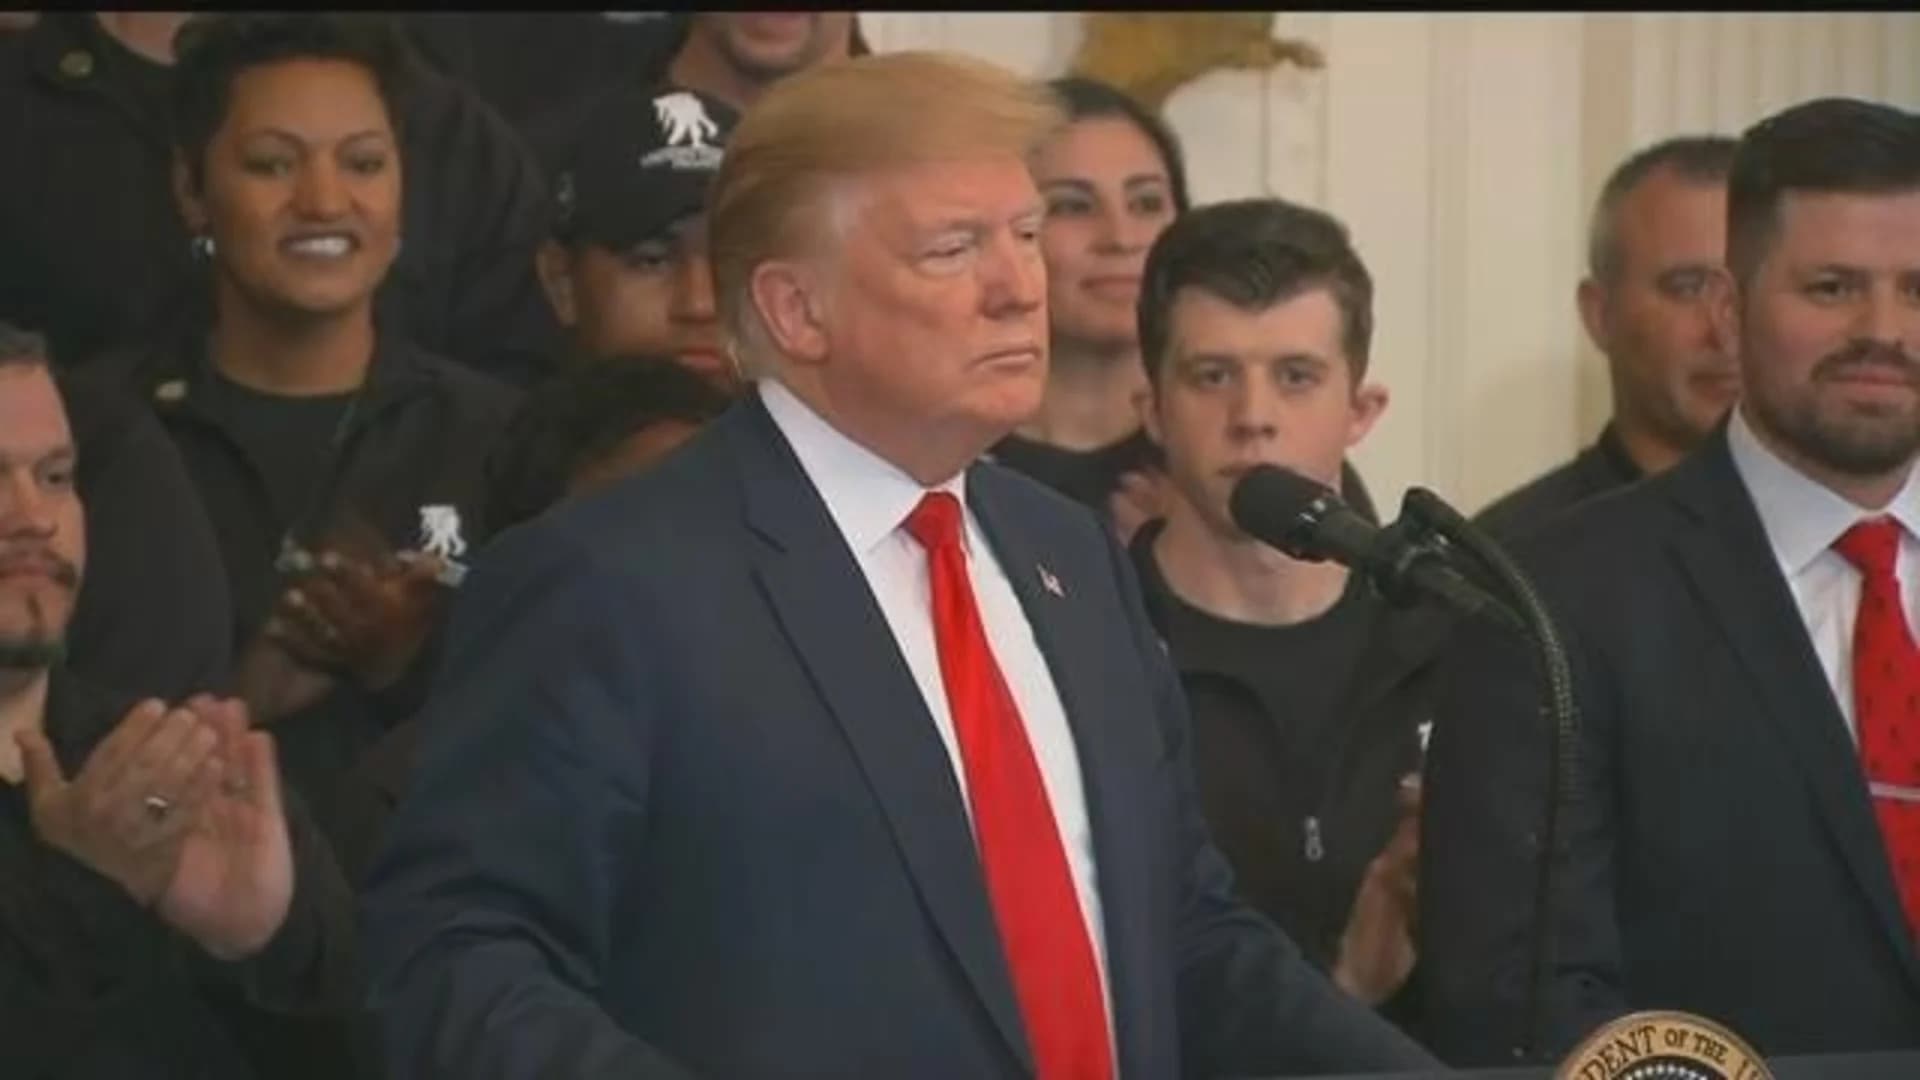 President Trump speaks at Wounded Warriors ceremony following news conference on Mueller report